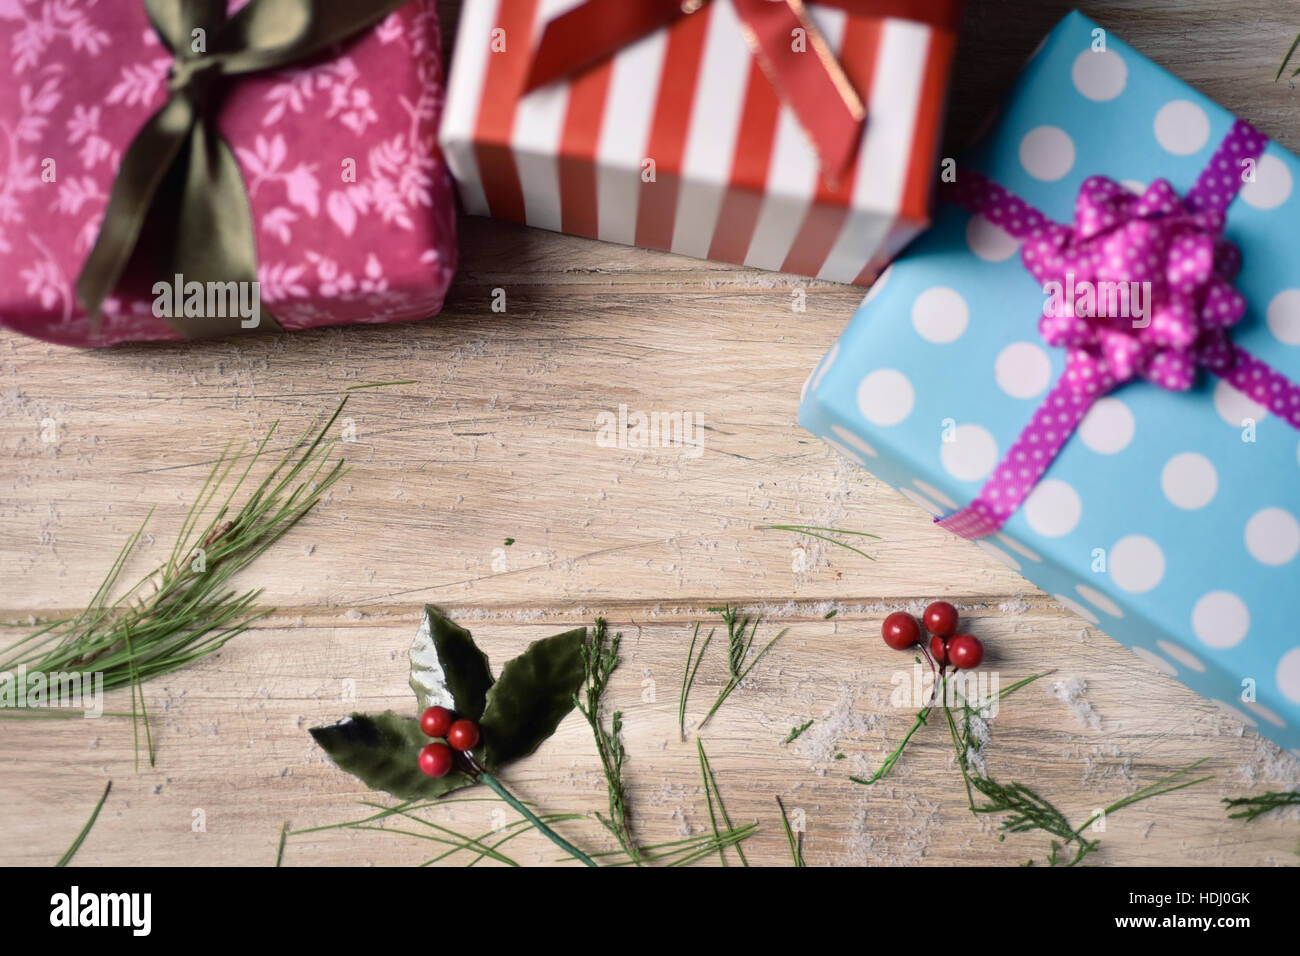 high-angle shot of some cozy gifts wrapped in different papers and tied with ribbons of different colors, and some natural ornaments, on a rustic wood Stock Photo